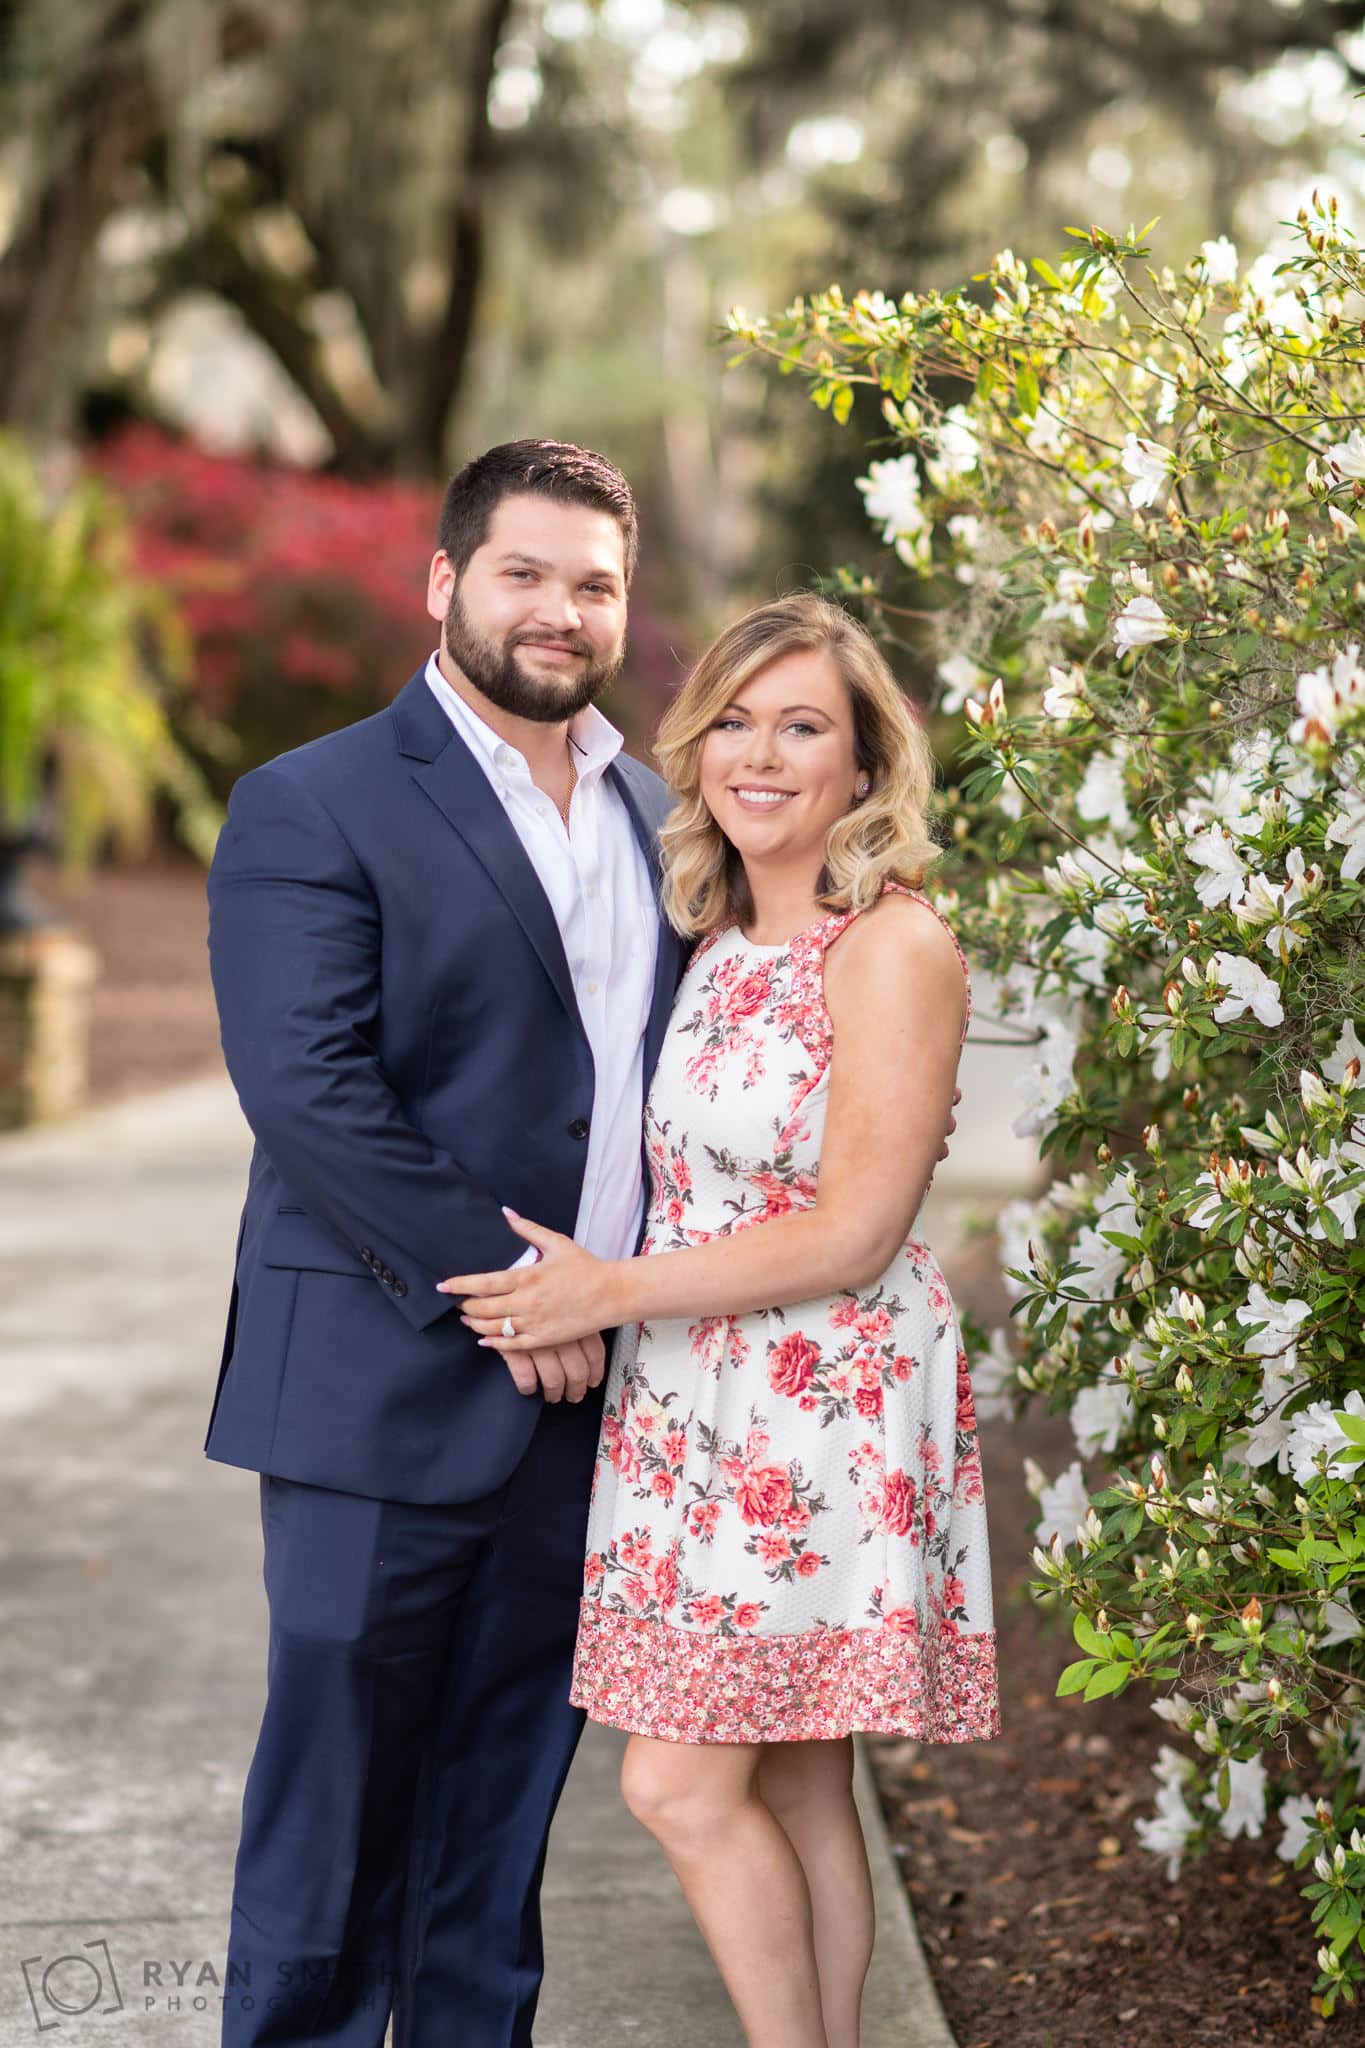 Engagement portrait by the flowers - Caledonia Golf & Fish Club